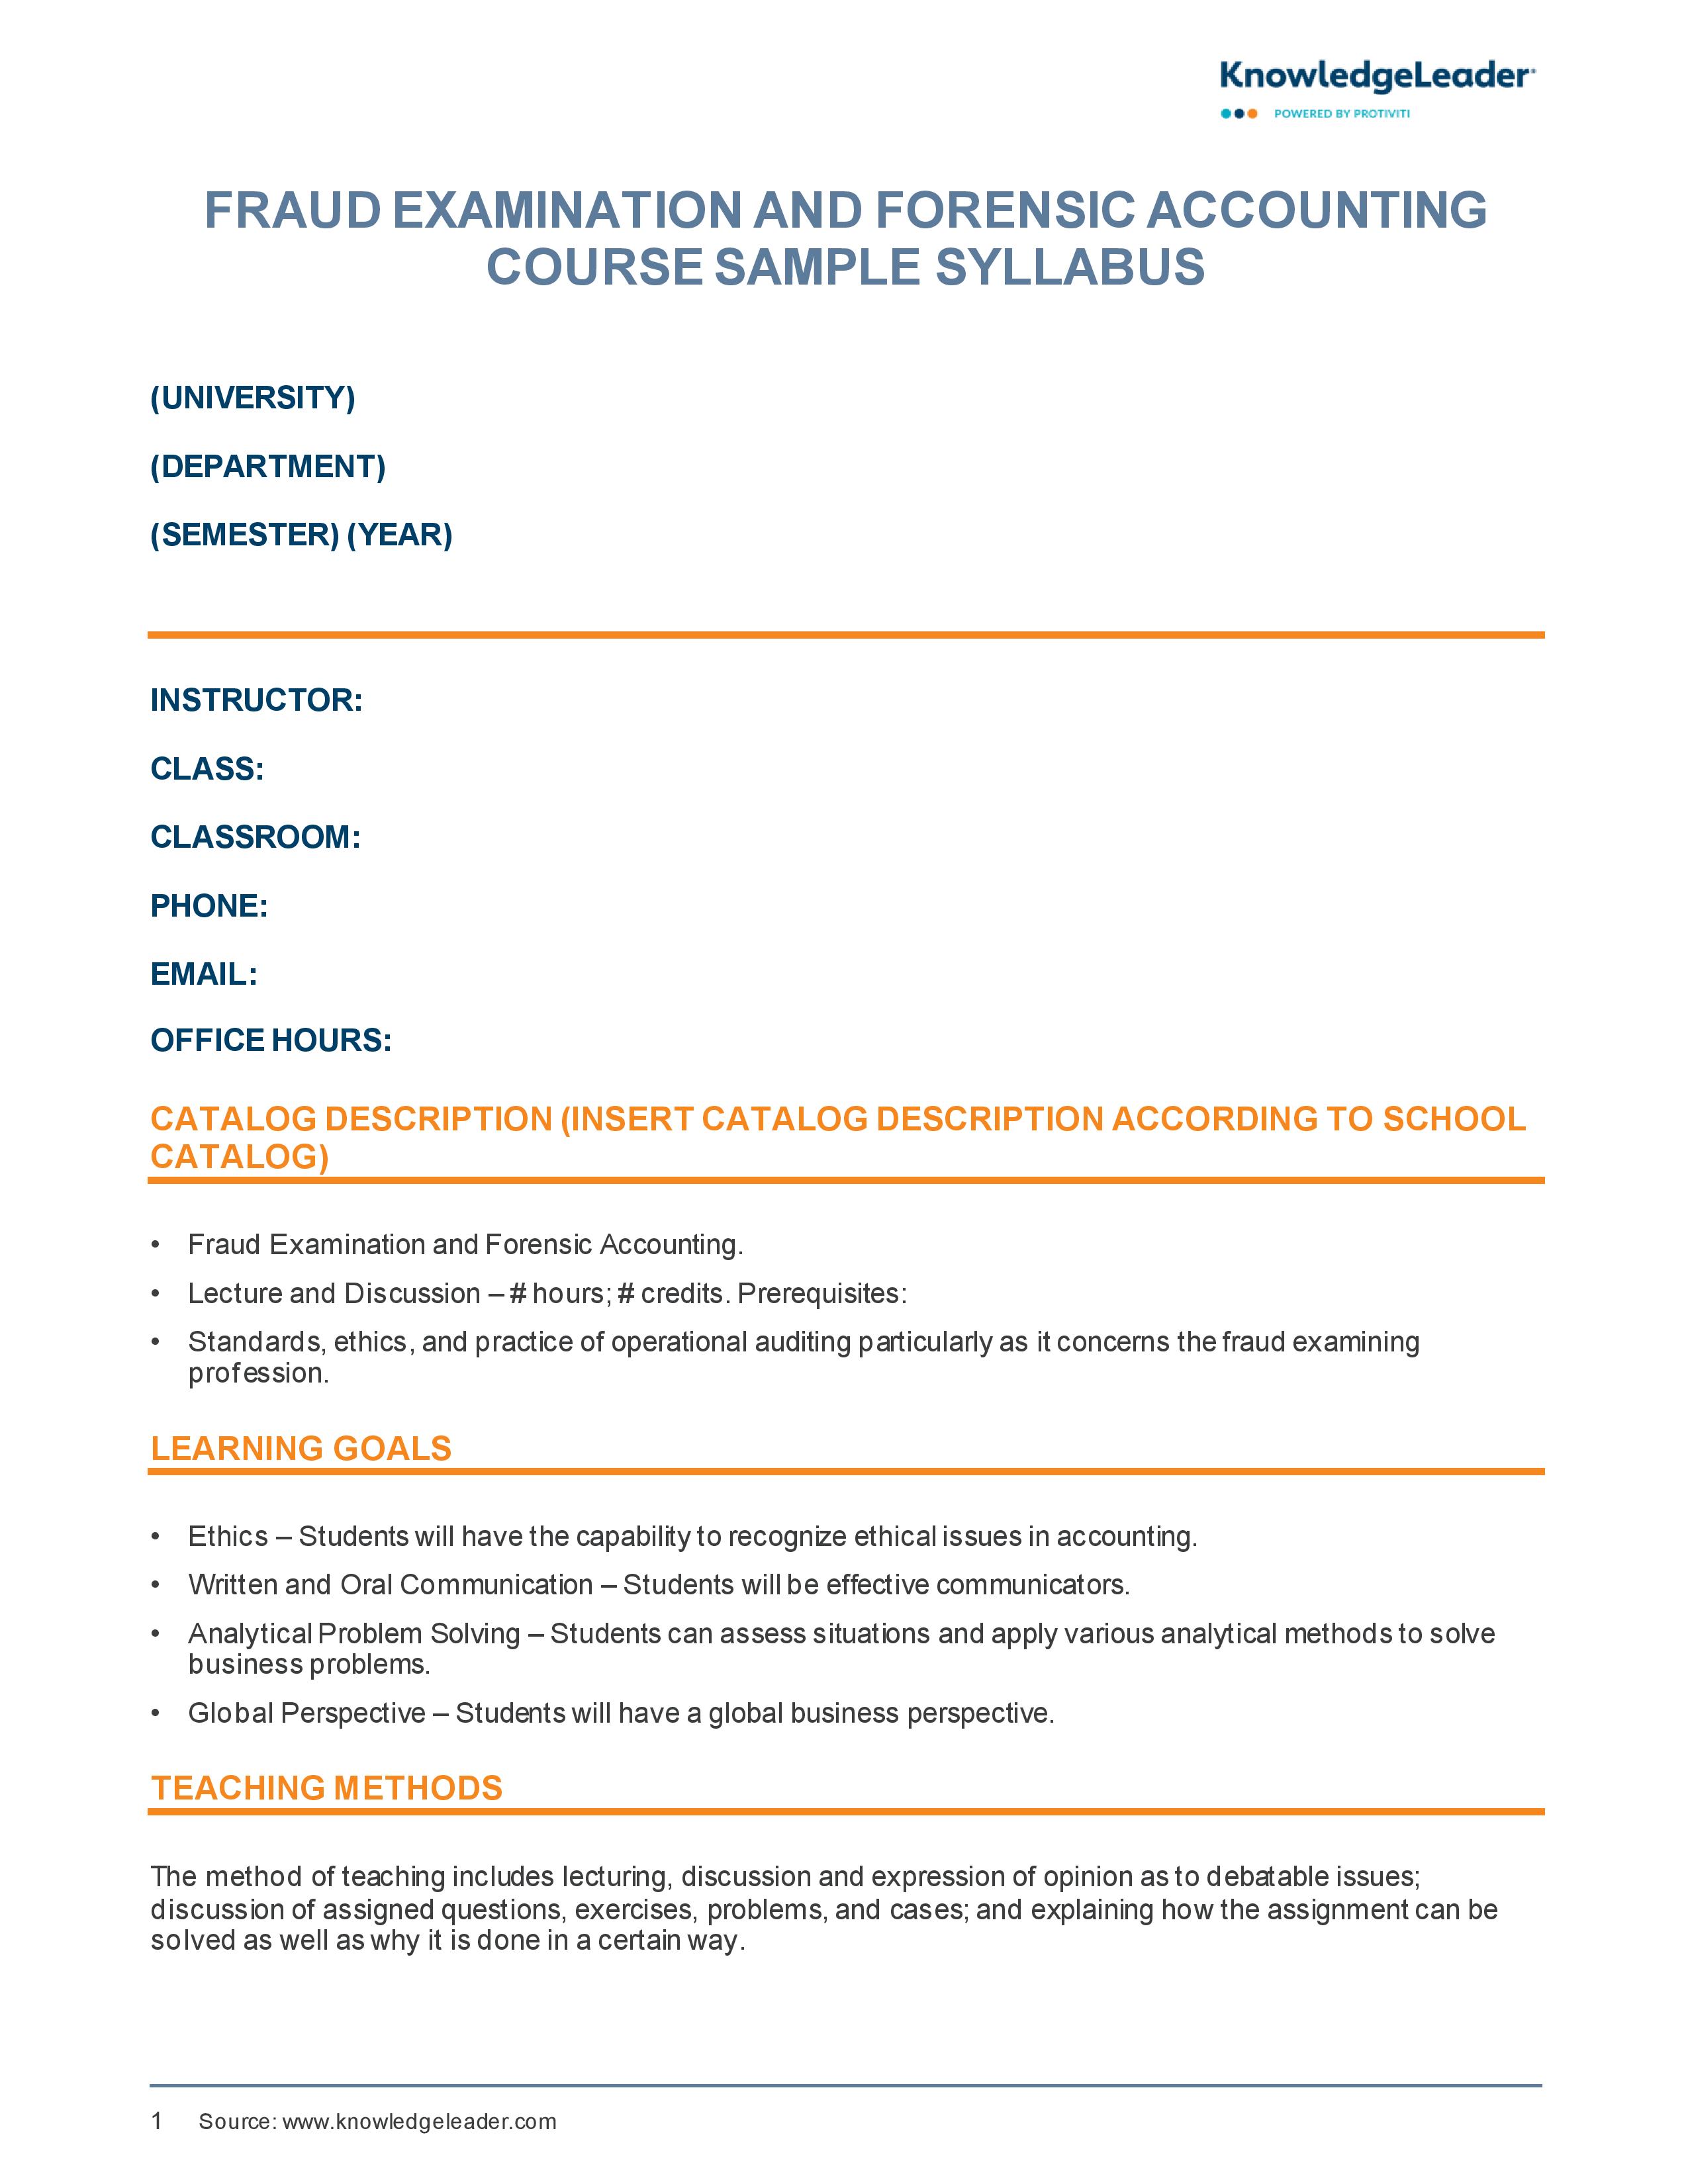 Screenshot of the first page of Fraud Examination and Forensic Accounting Sample Syllabus